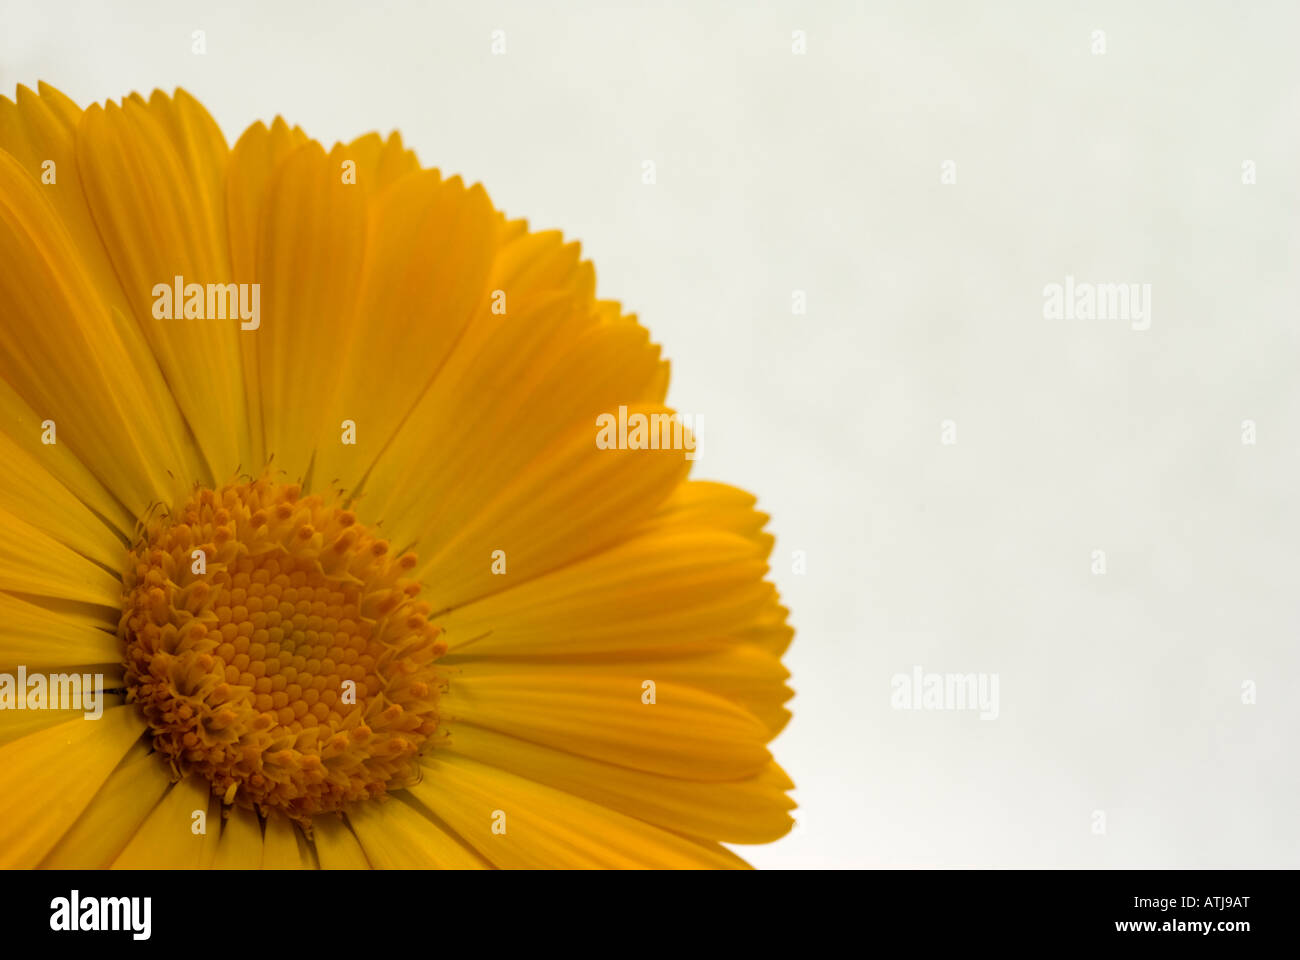 Calendula Officinalis flowers which have medicinal uses and are often used to produce medications to treat skin conditions Stock Photo